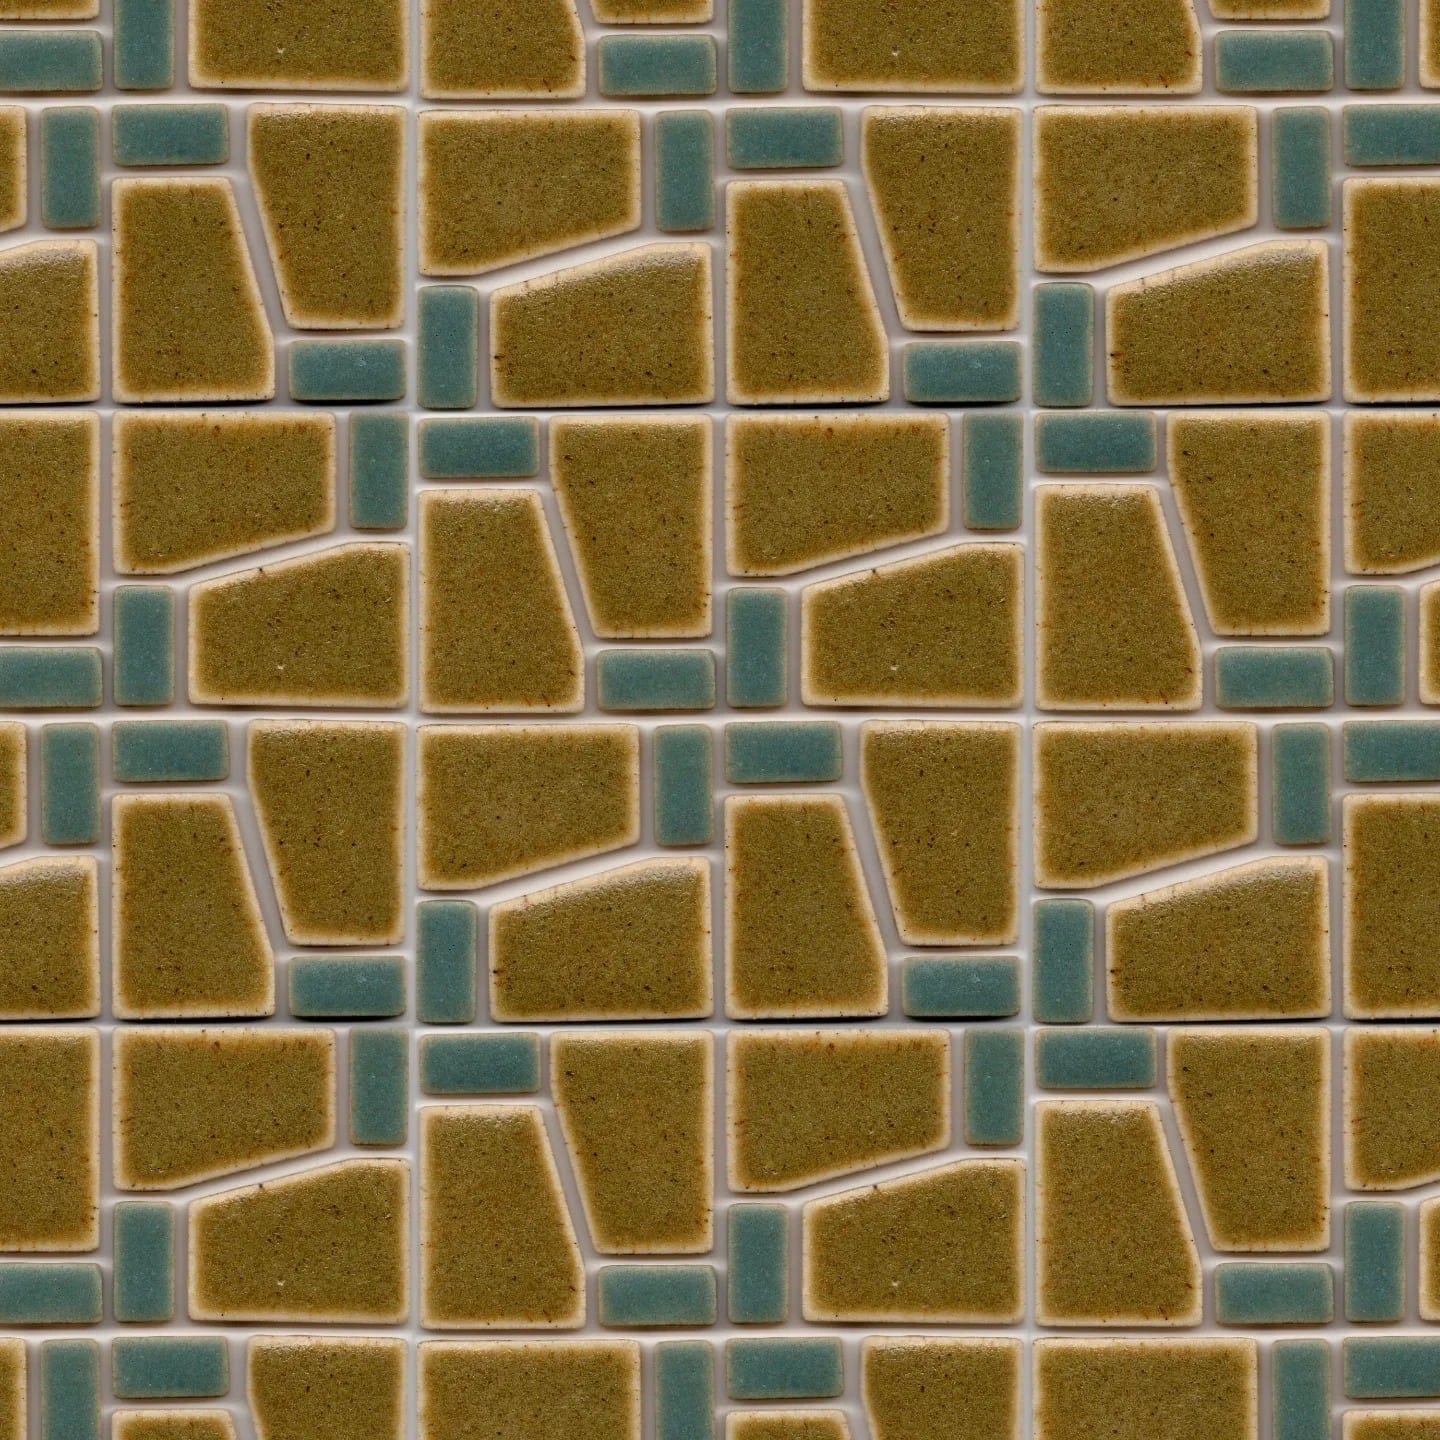 a collection of a square tile with brown and blue geometric components nested together